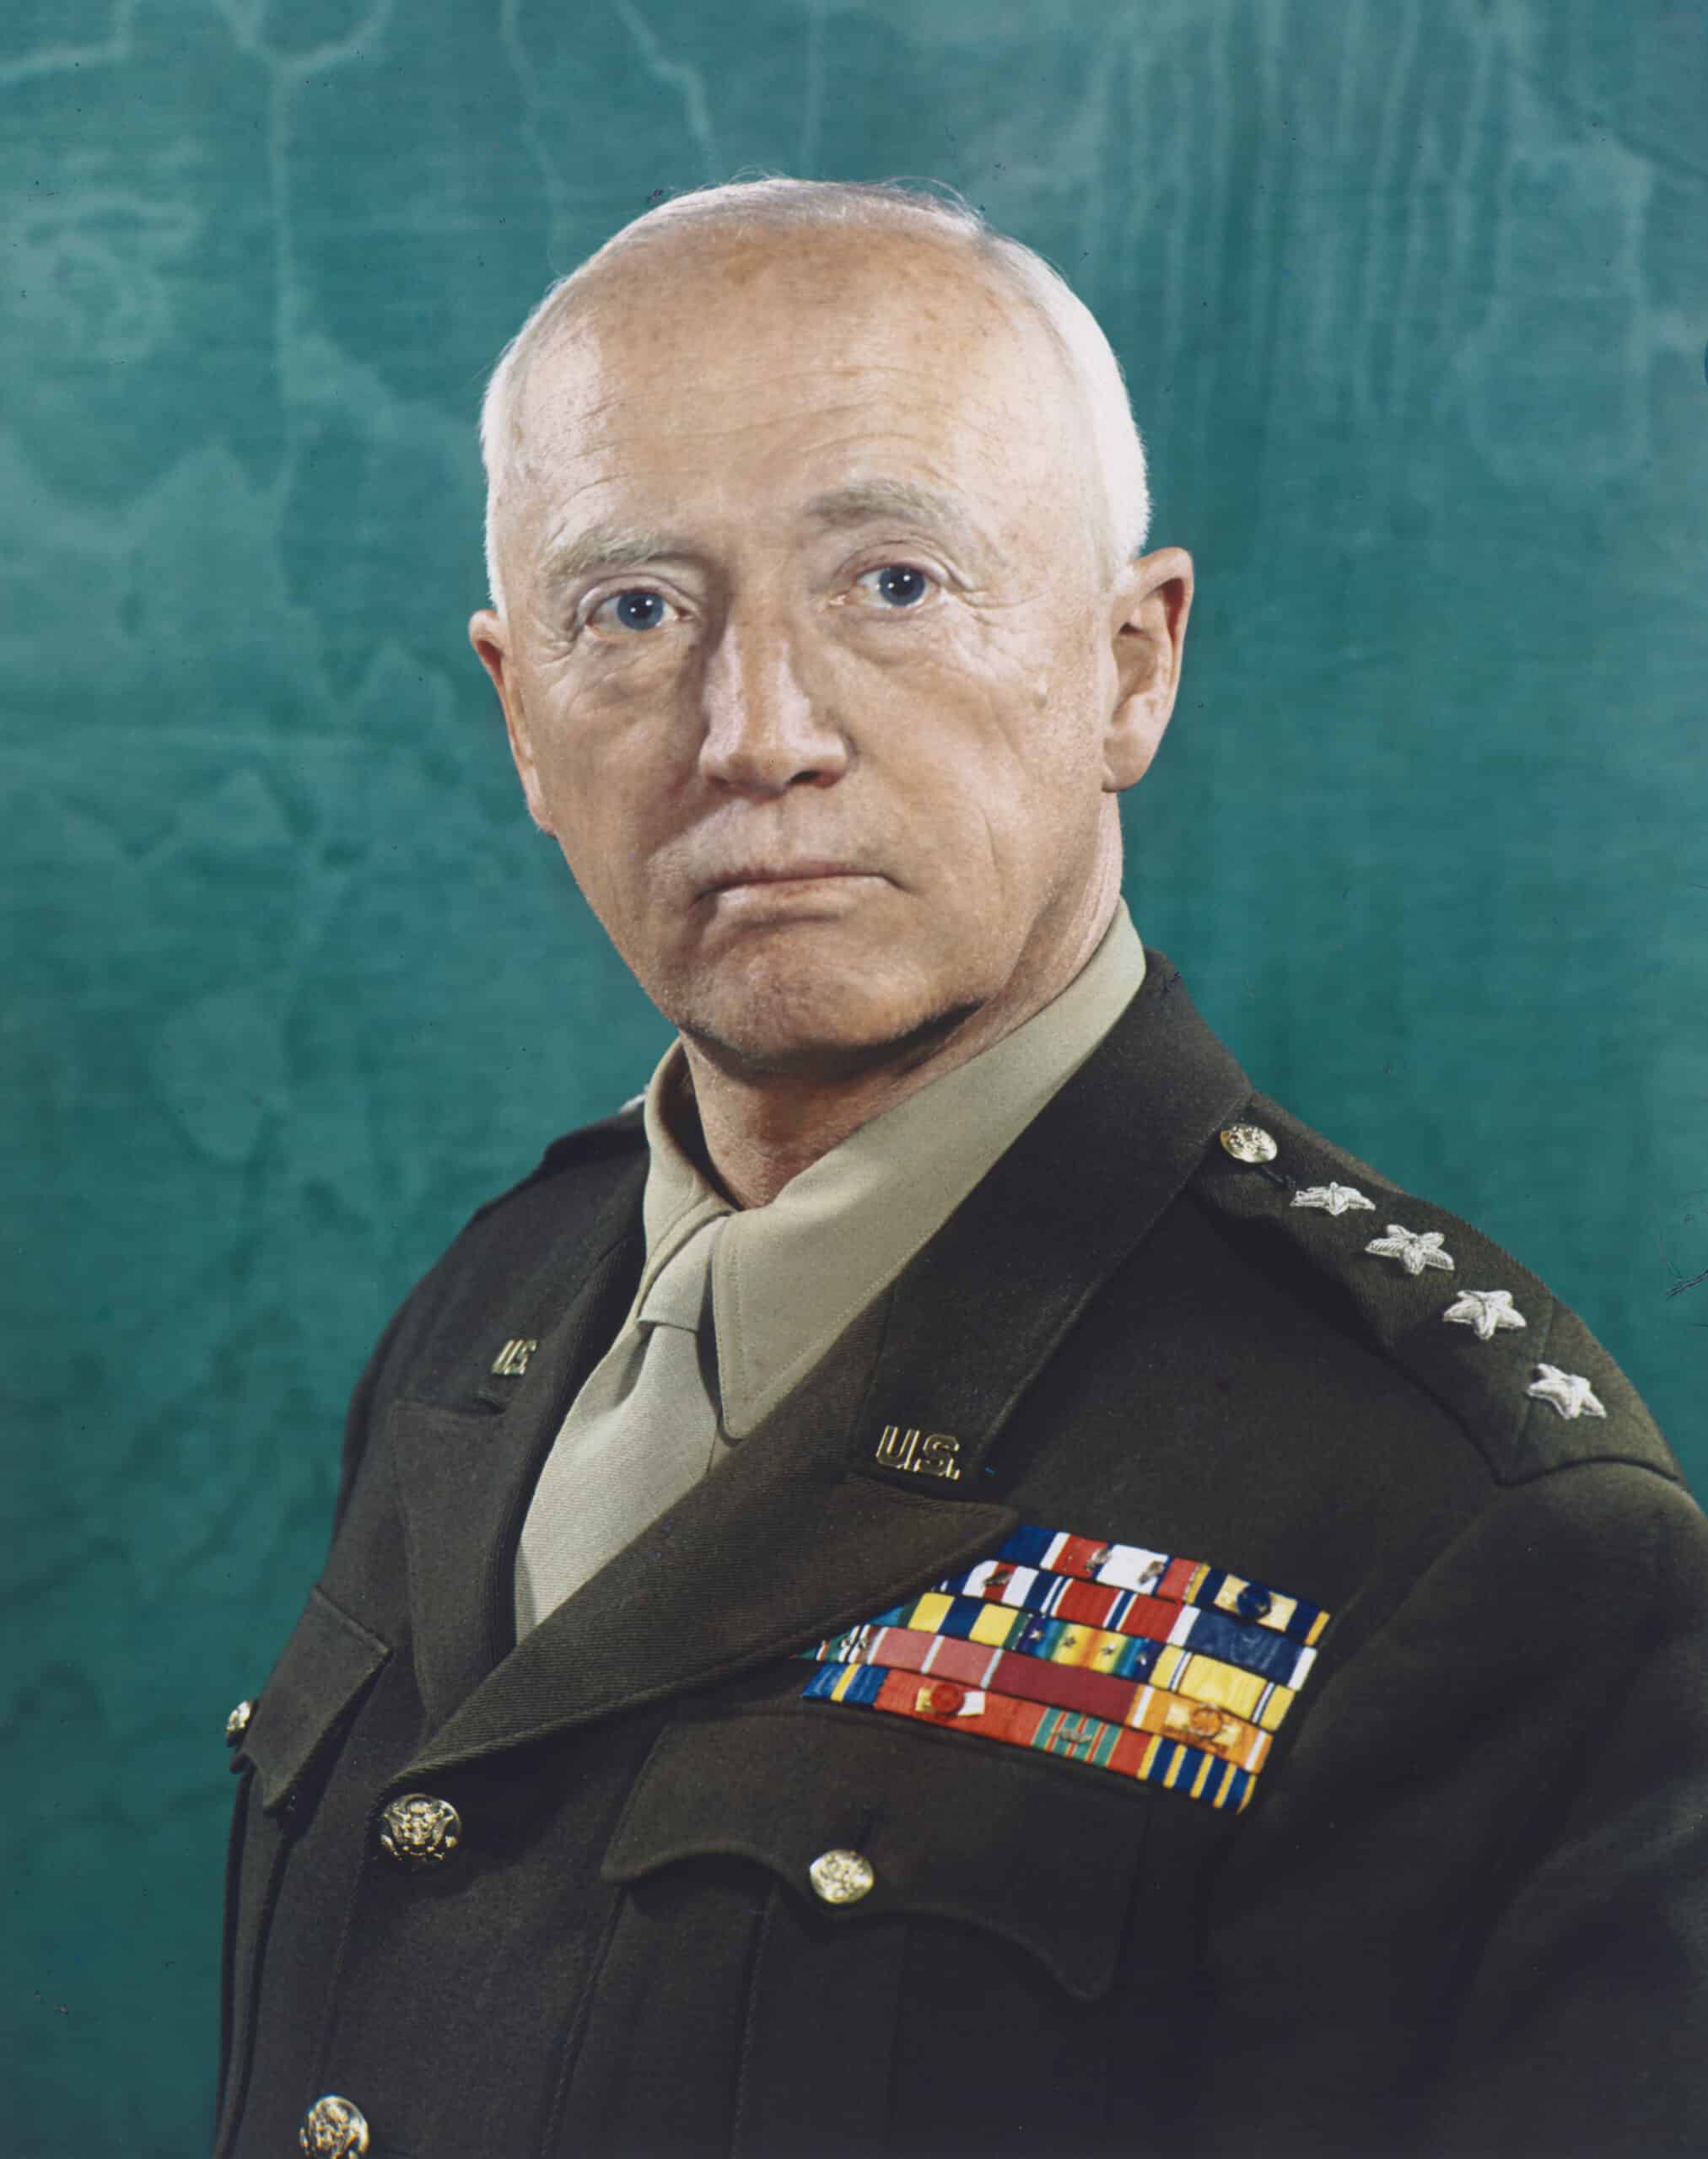 General George Patton by Robert F. Cranston, Lee Elkins, and Harry Warnecke, 1945, color carbro print, from the National Portrait Gallery which has explicitly released this digital image under the CC0 license.